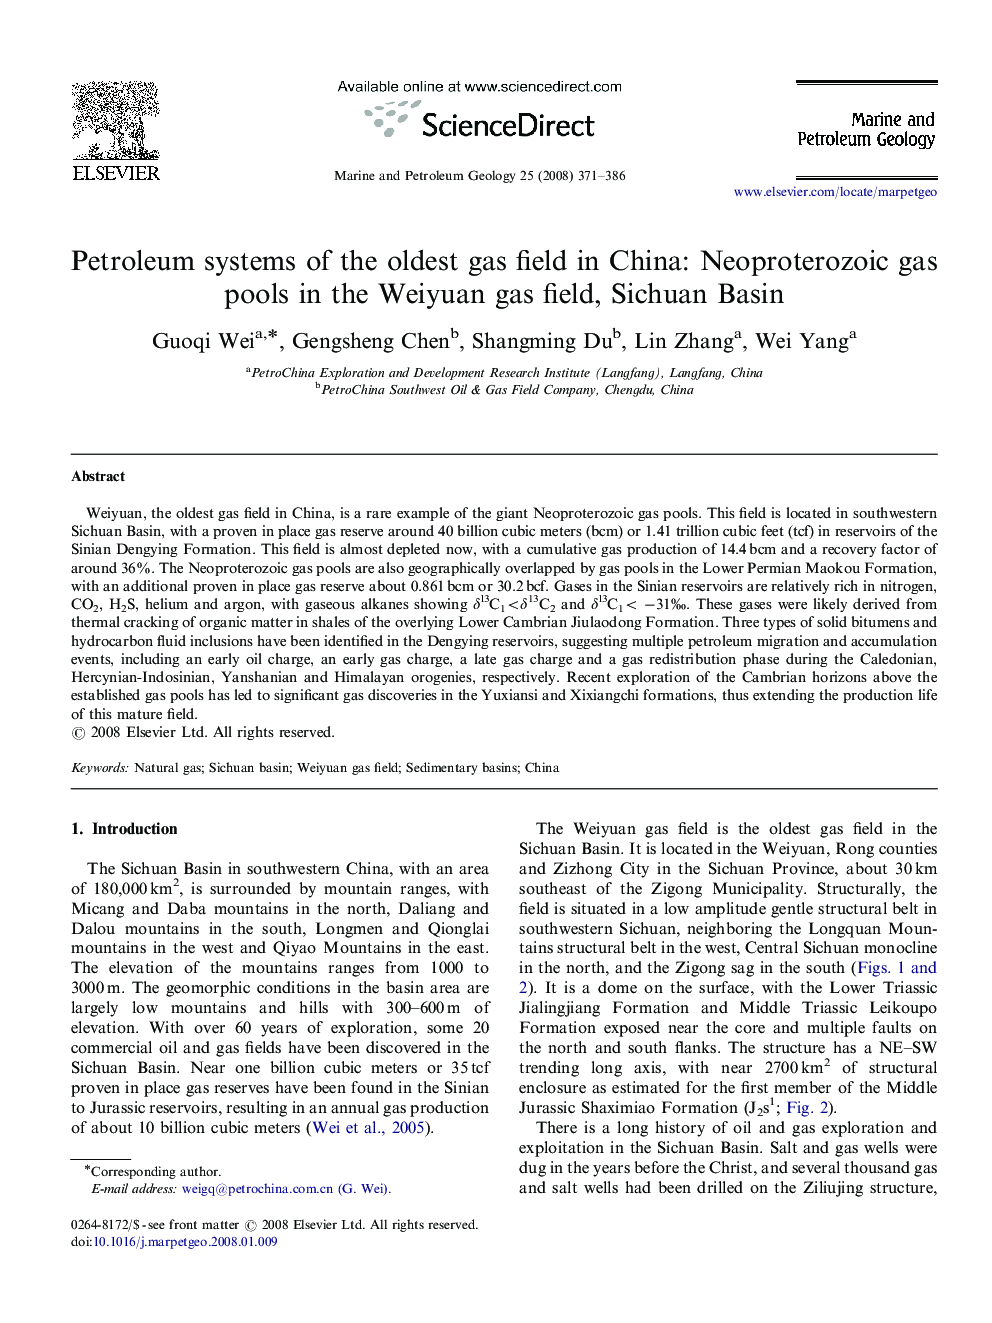 Petroleum systems of the oldest gas field in China: Neoproterozoic gas pools in the Weiyuan gas field, Sichuan Basin